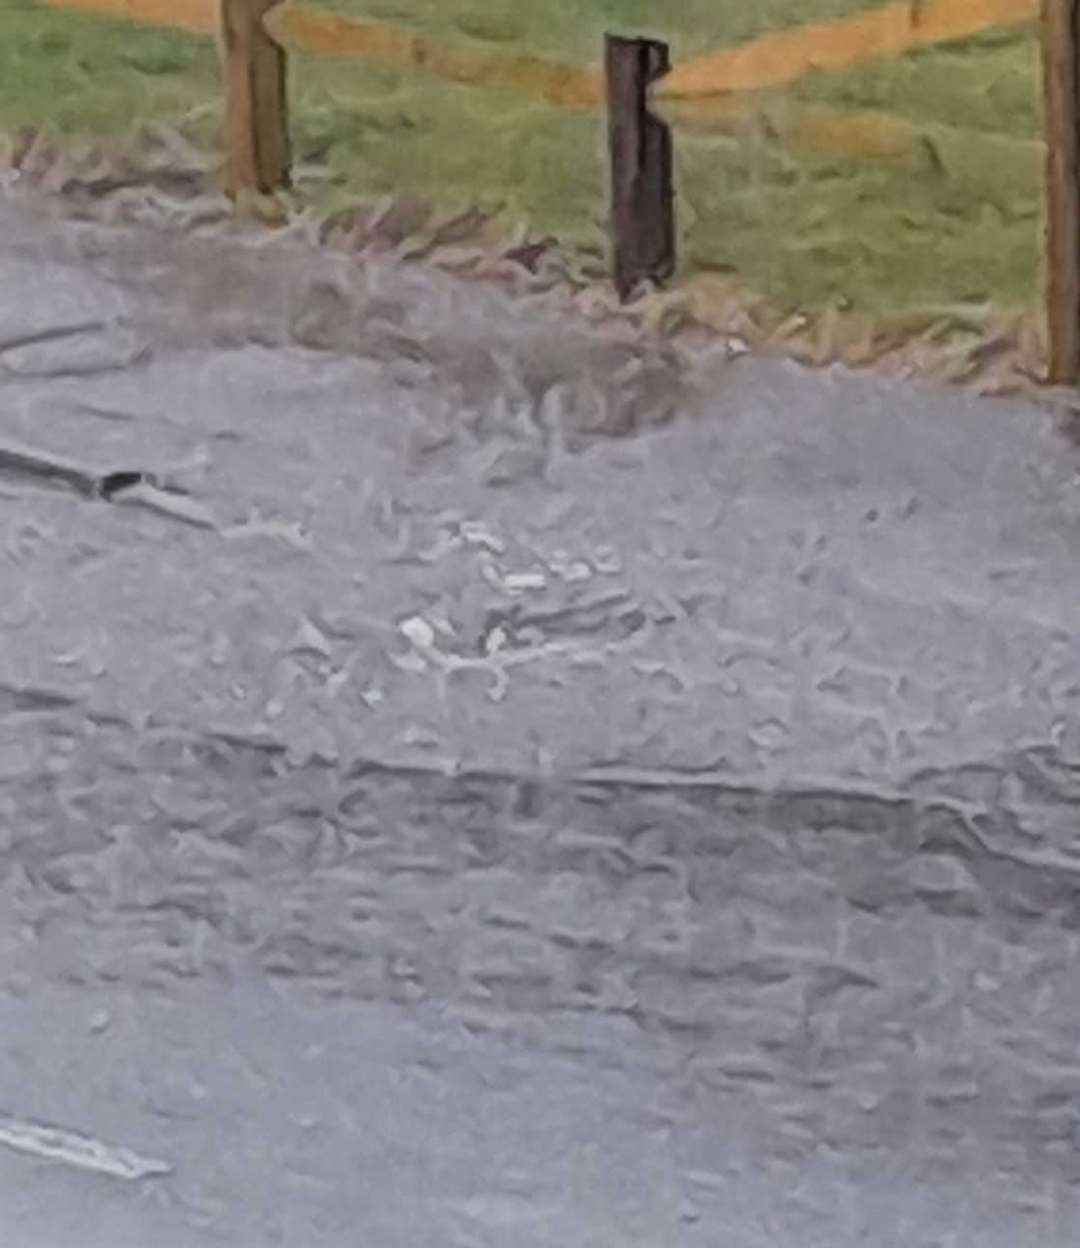 Rain was "gushing out drains" in Penshurst. Picture: Lucy Fuller-Rowell